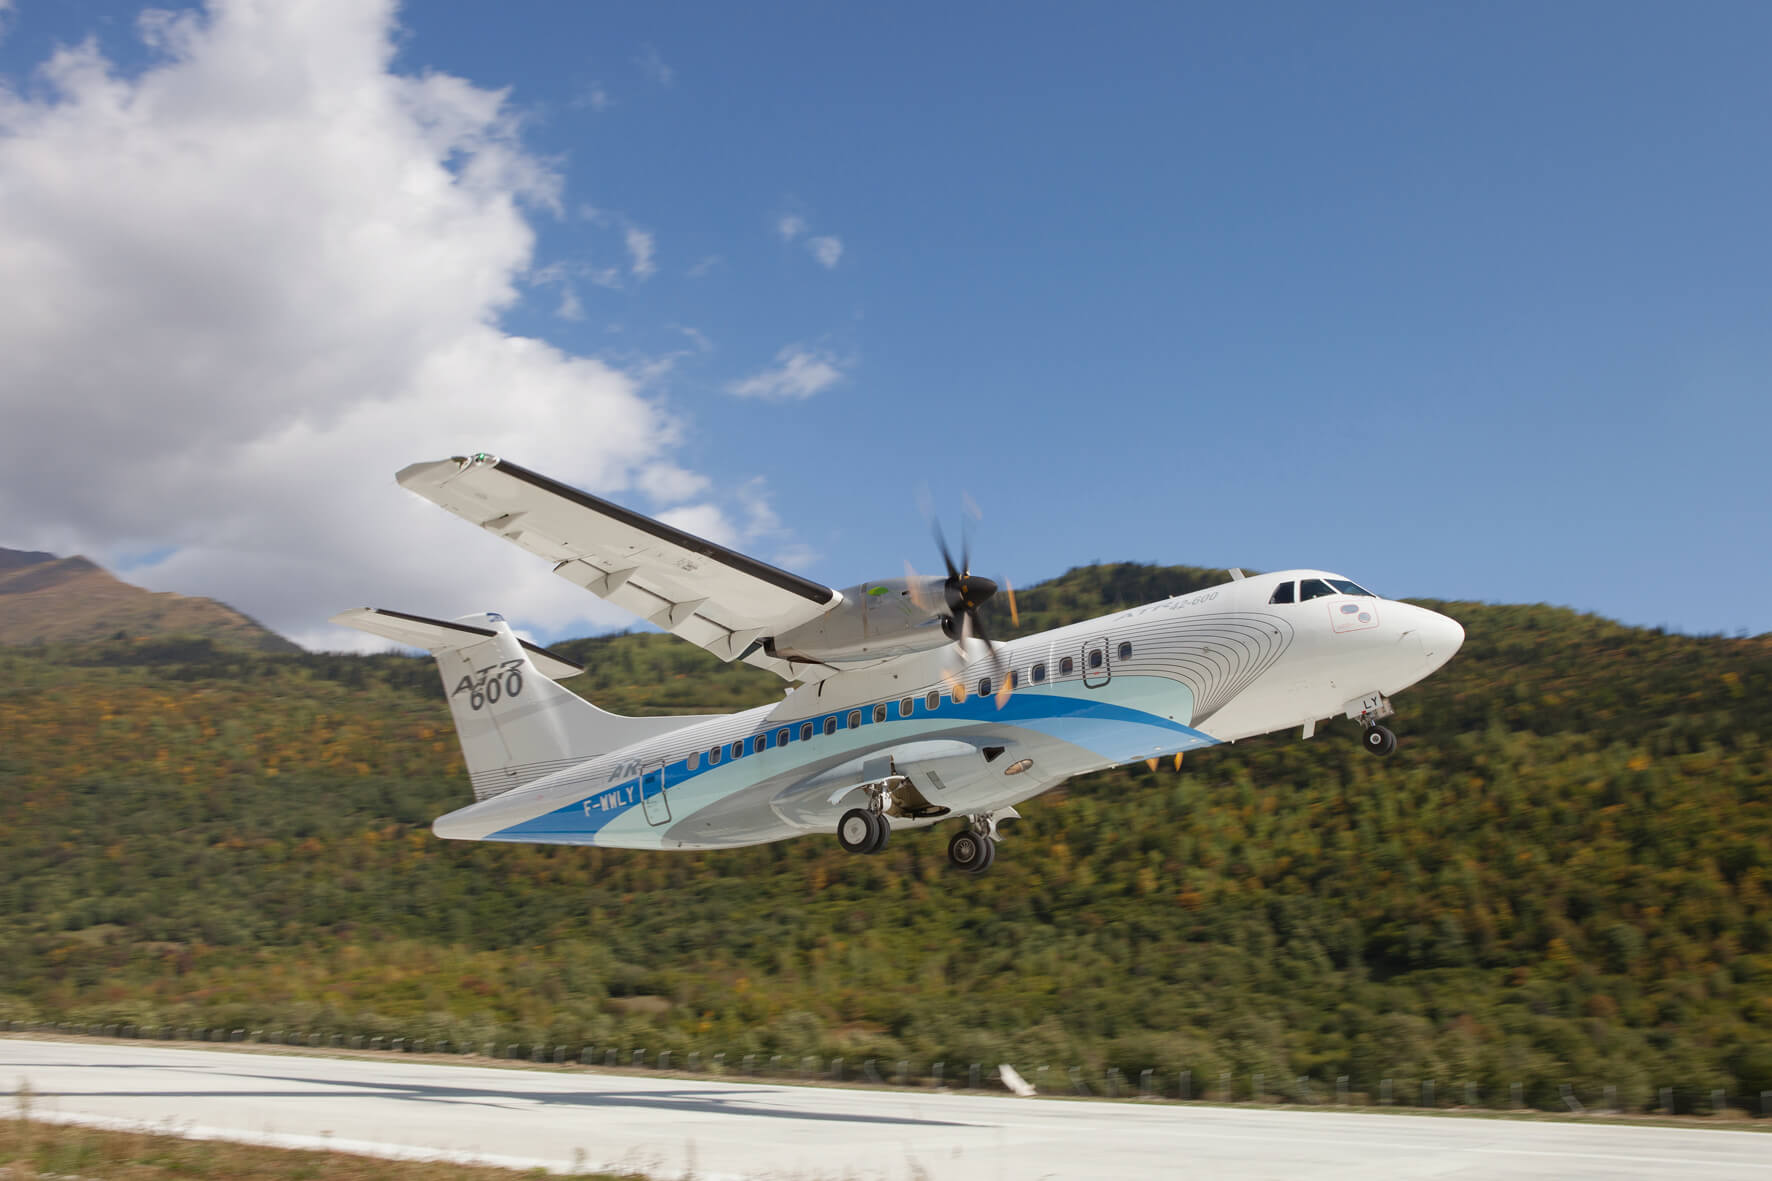 NAC delivers one new ATR 42-600 to Stobart Air on lease